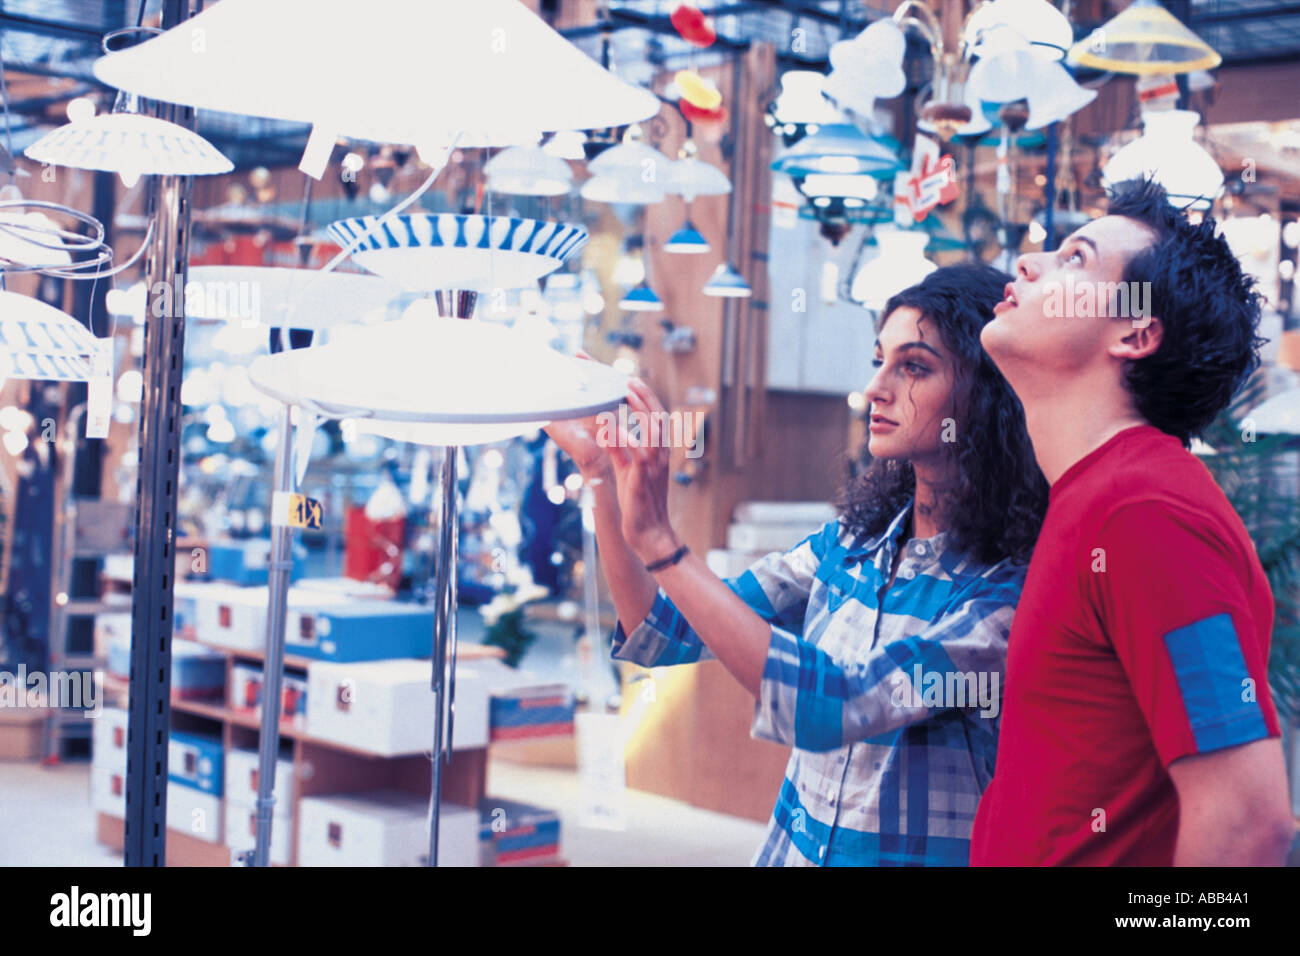 Couple in a shop Stock Photo